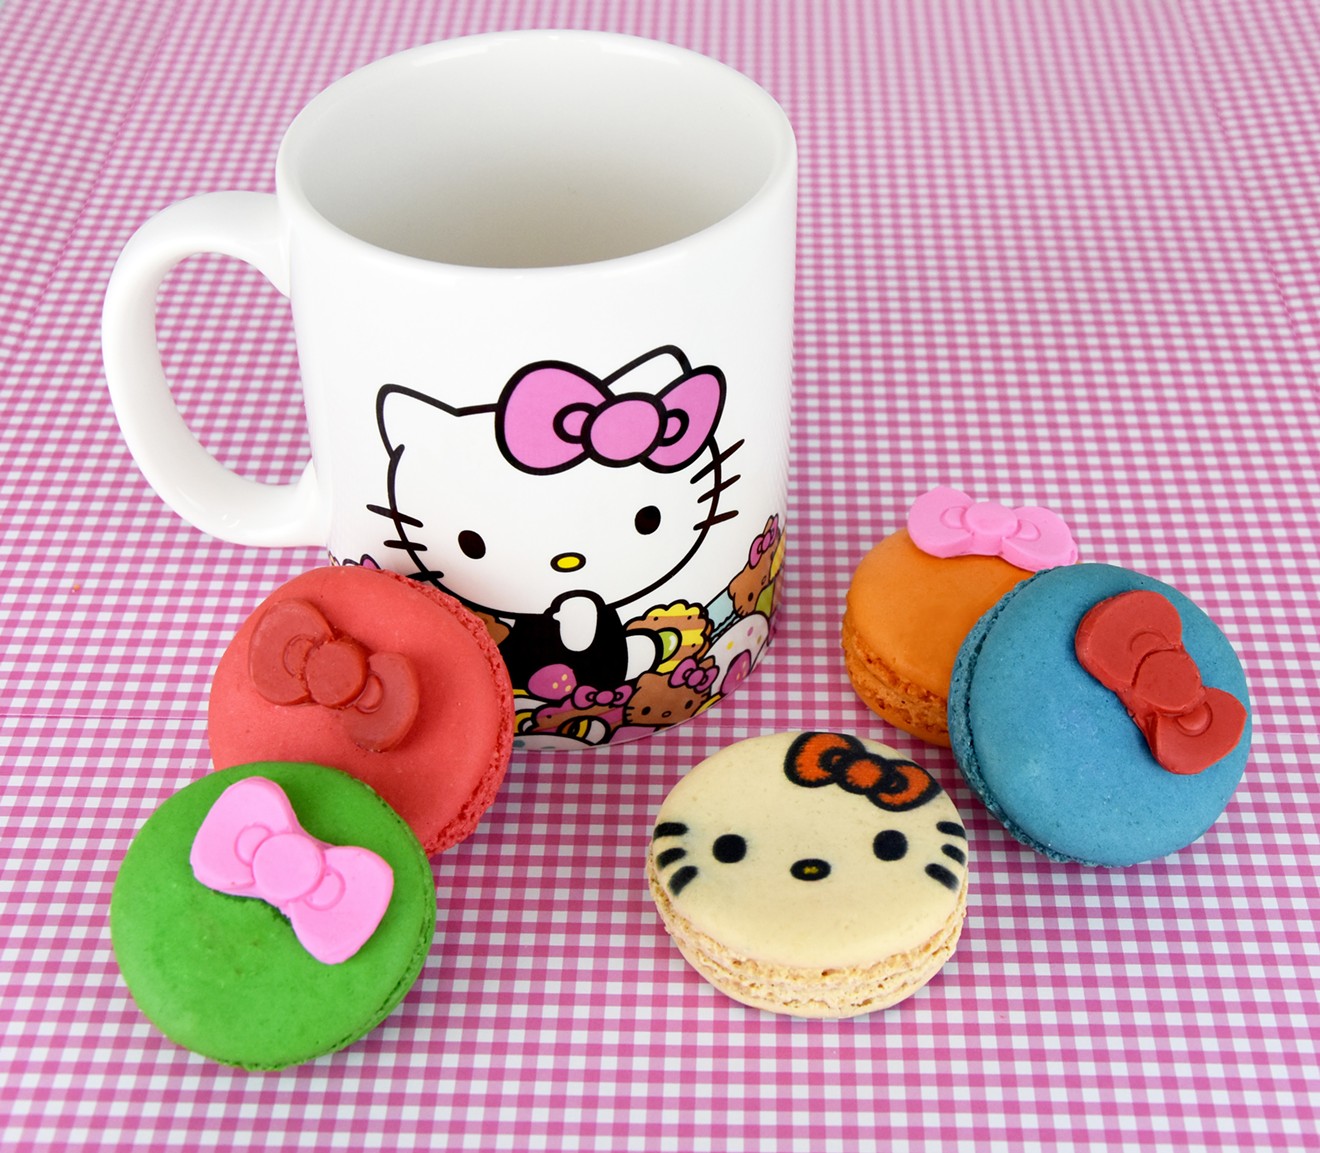 Find a selection of Hello Kitty swag onboard the truck.